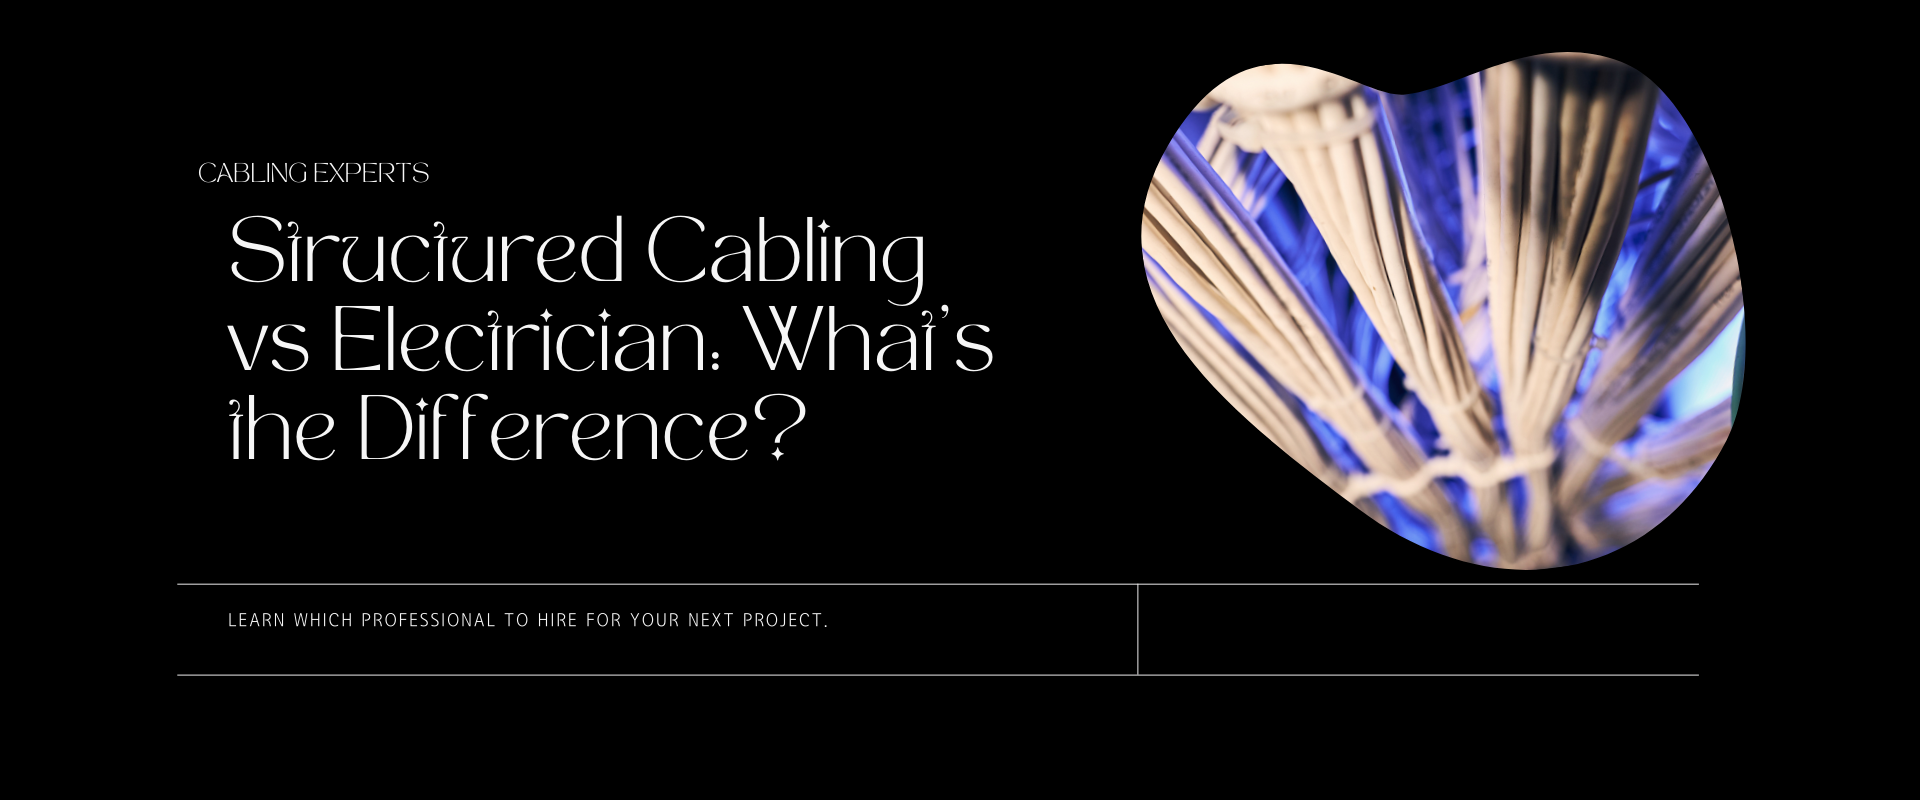 Structured Cabling vs Electrician